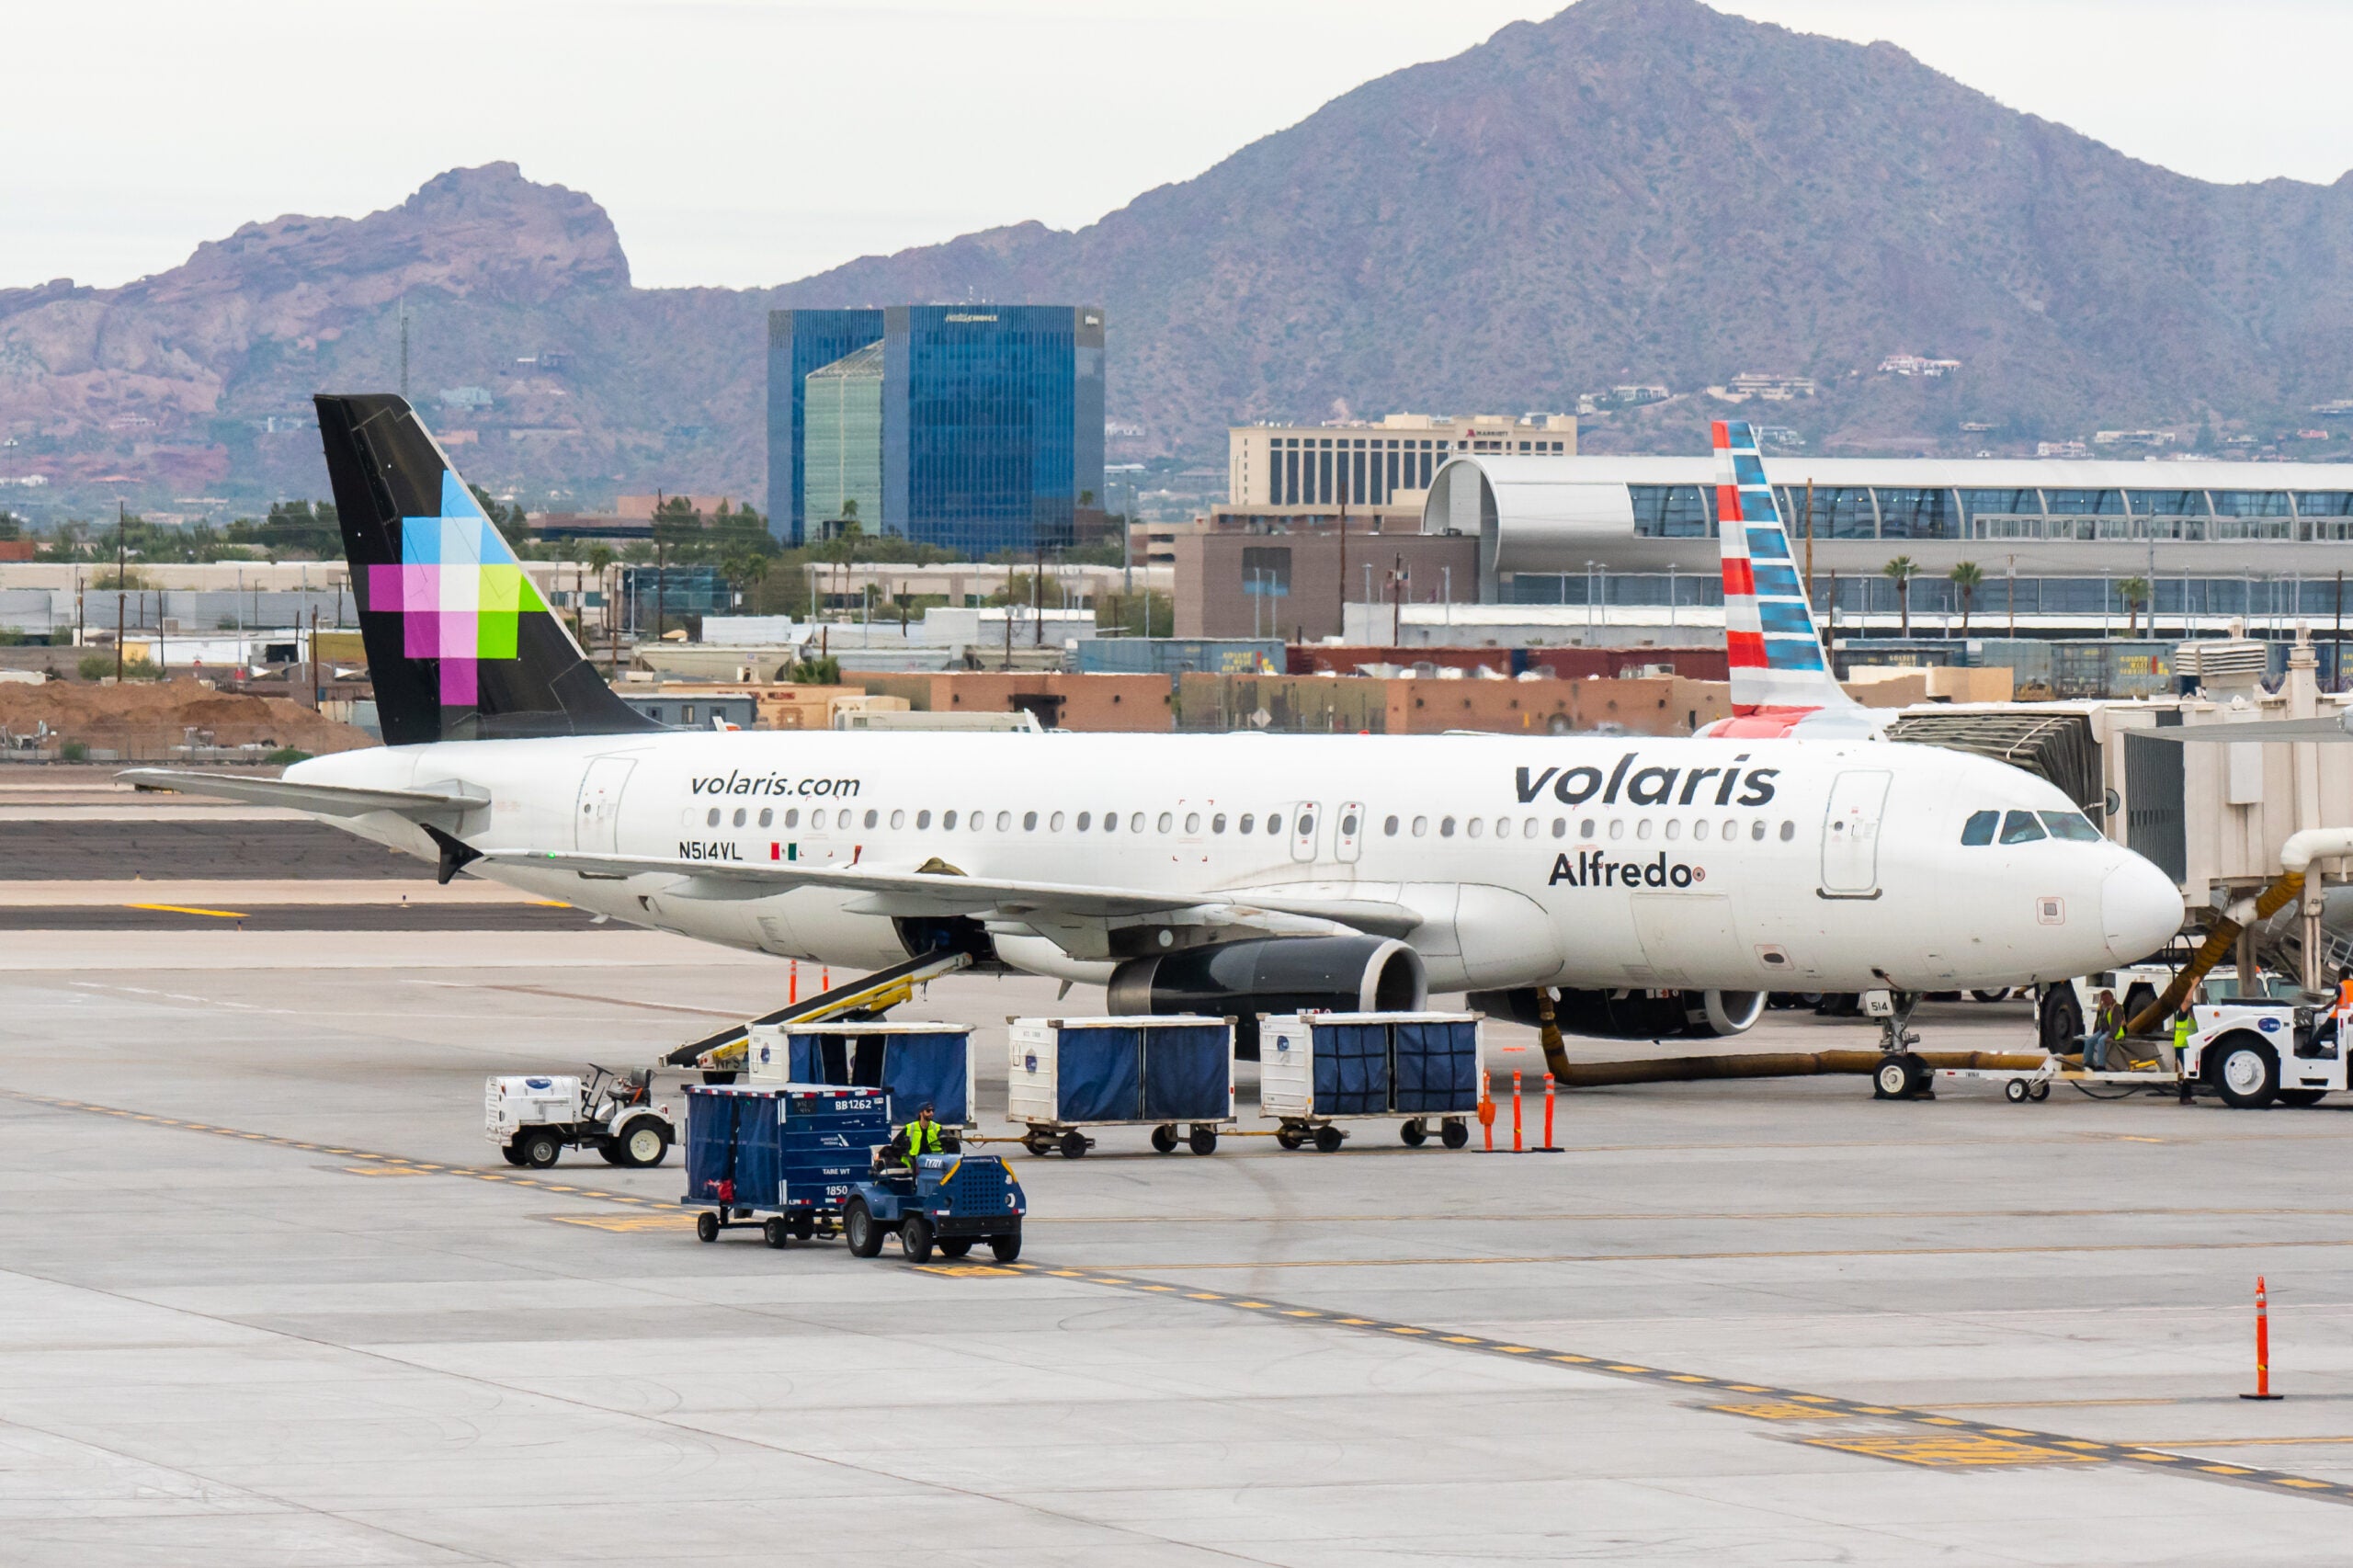 Phoenix Sky Harbor Airport 101: The ultimate guide to PHX